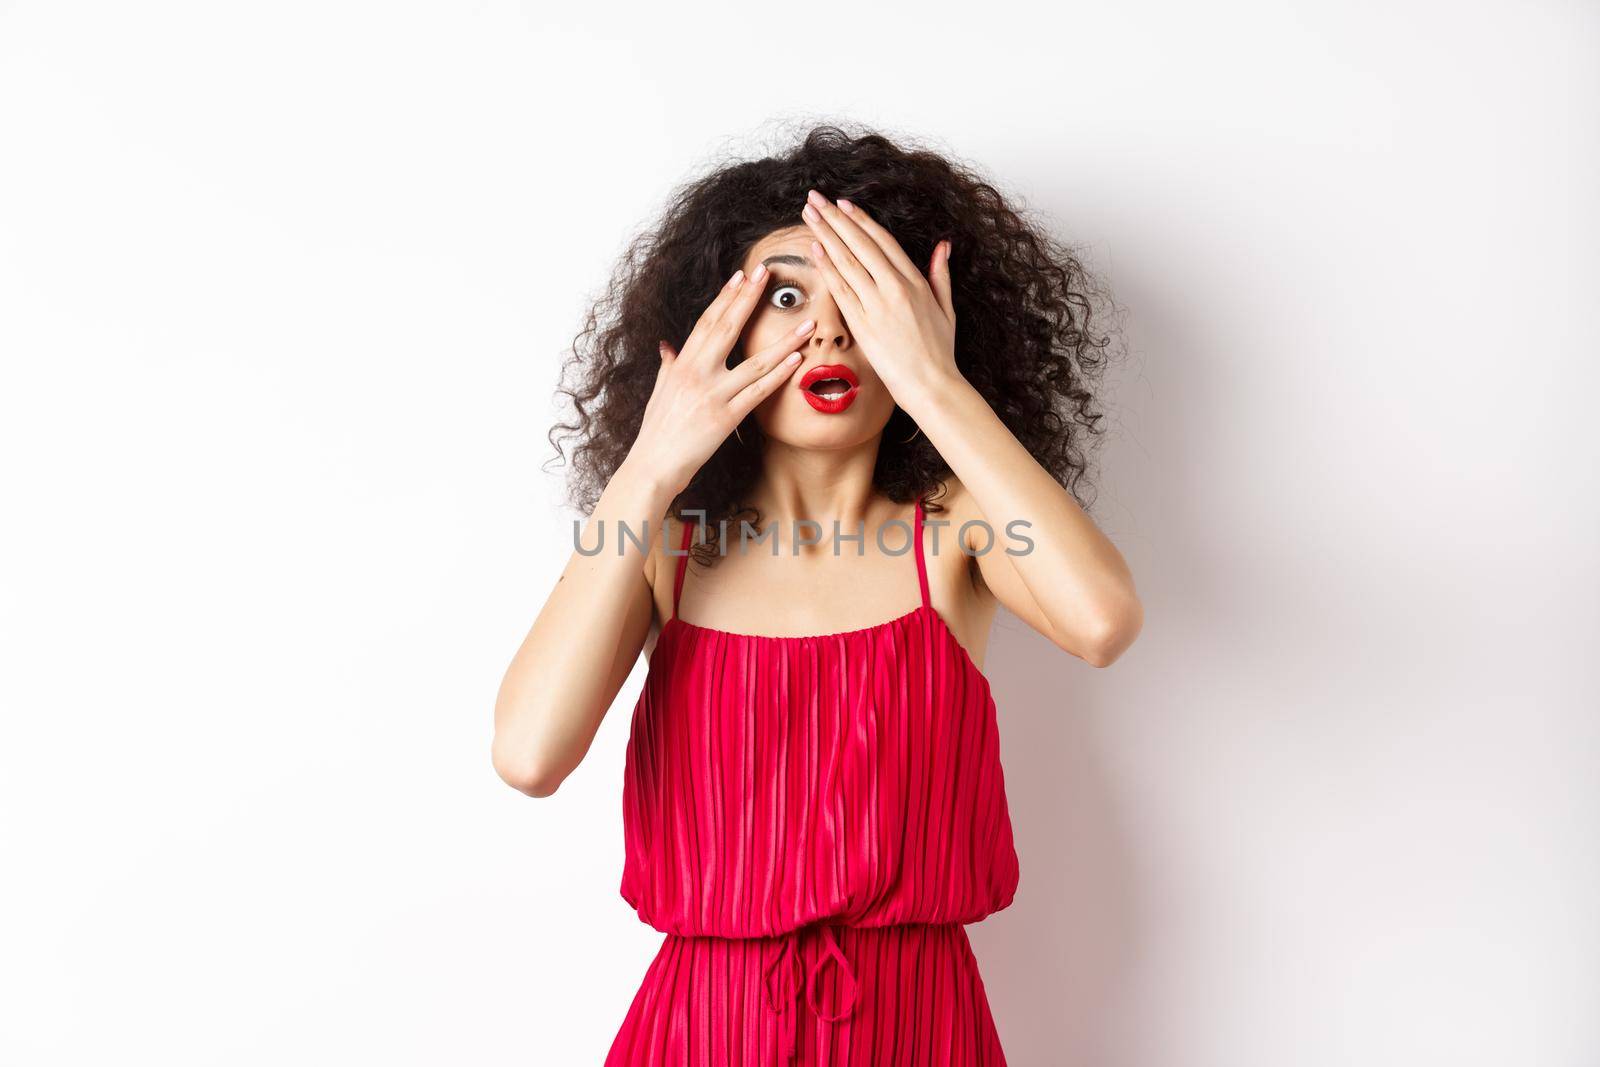 Excited curly-haired girl in dress, cover eyes with hands and peek through fingers, gasping shocked at camera, standing on white background.